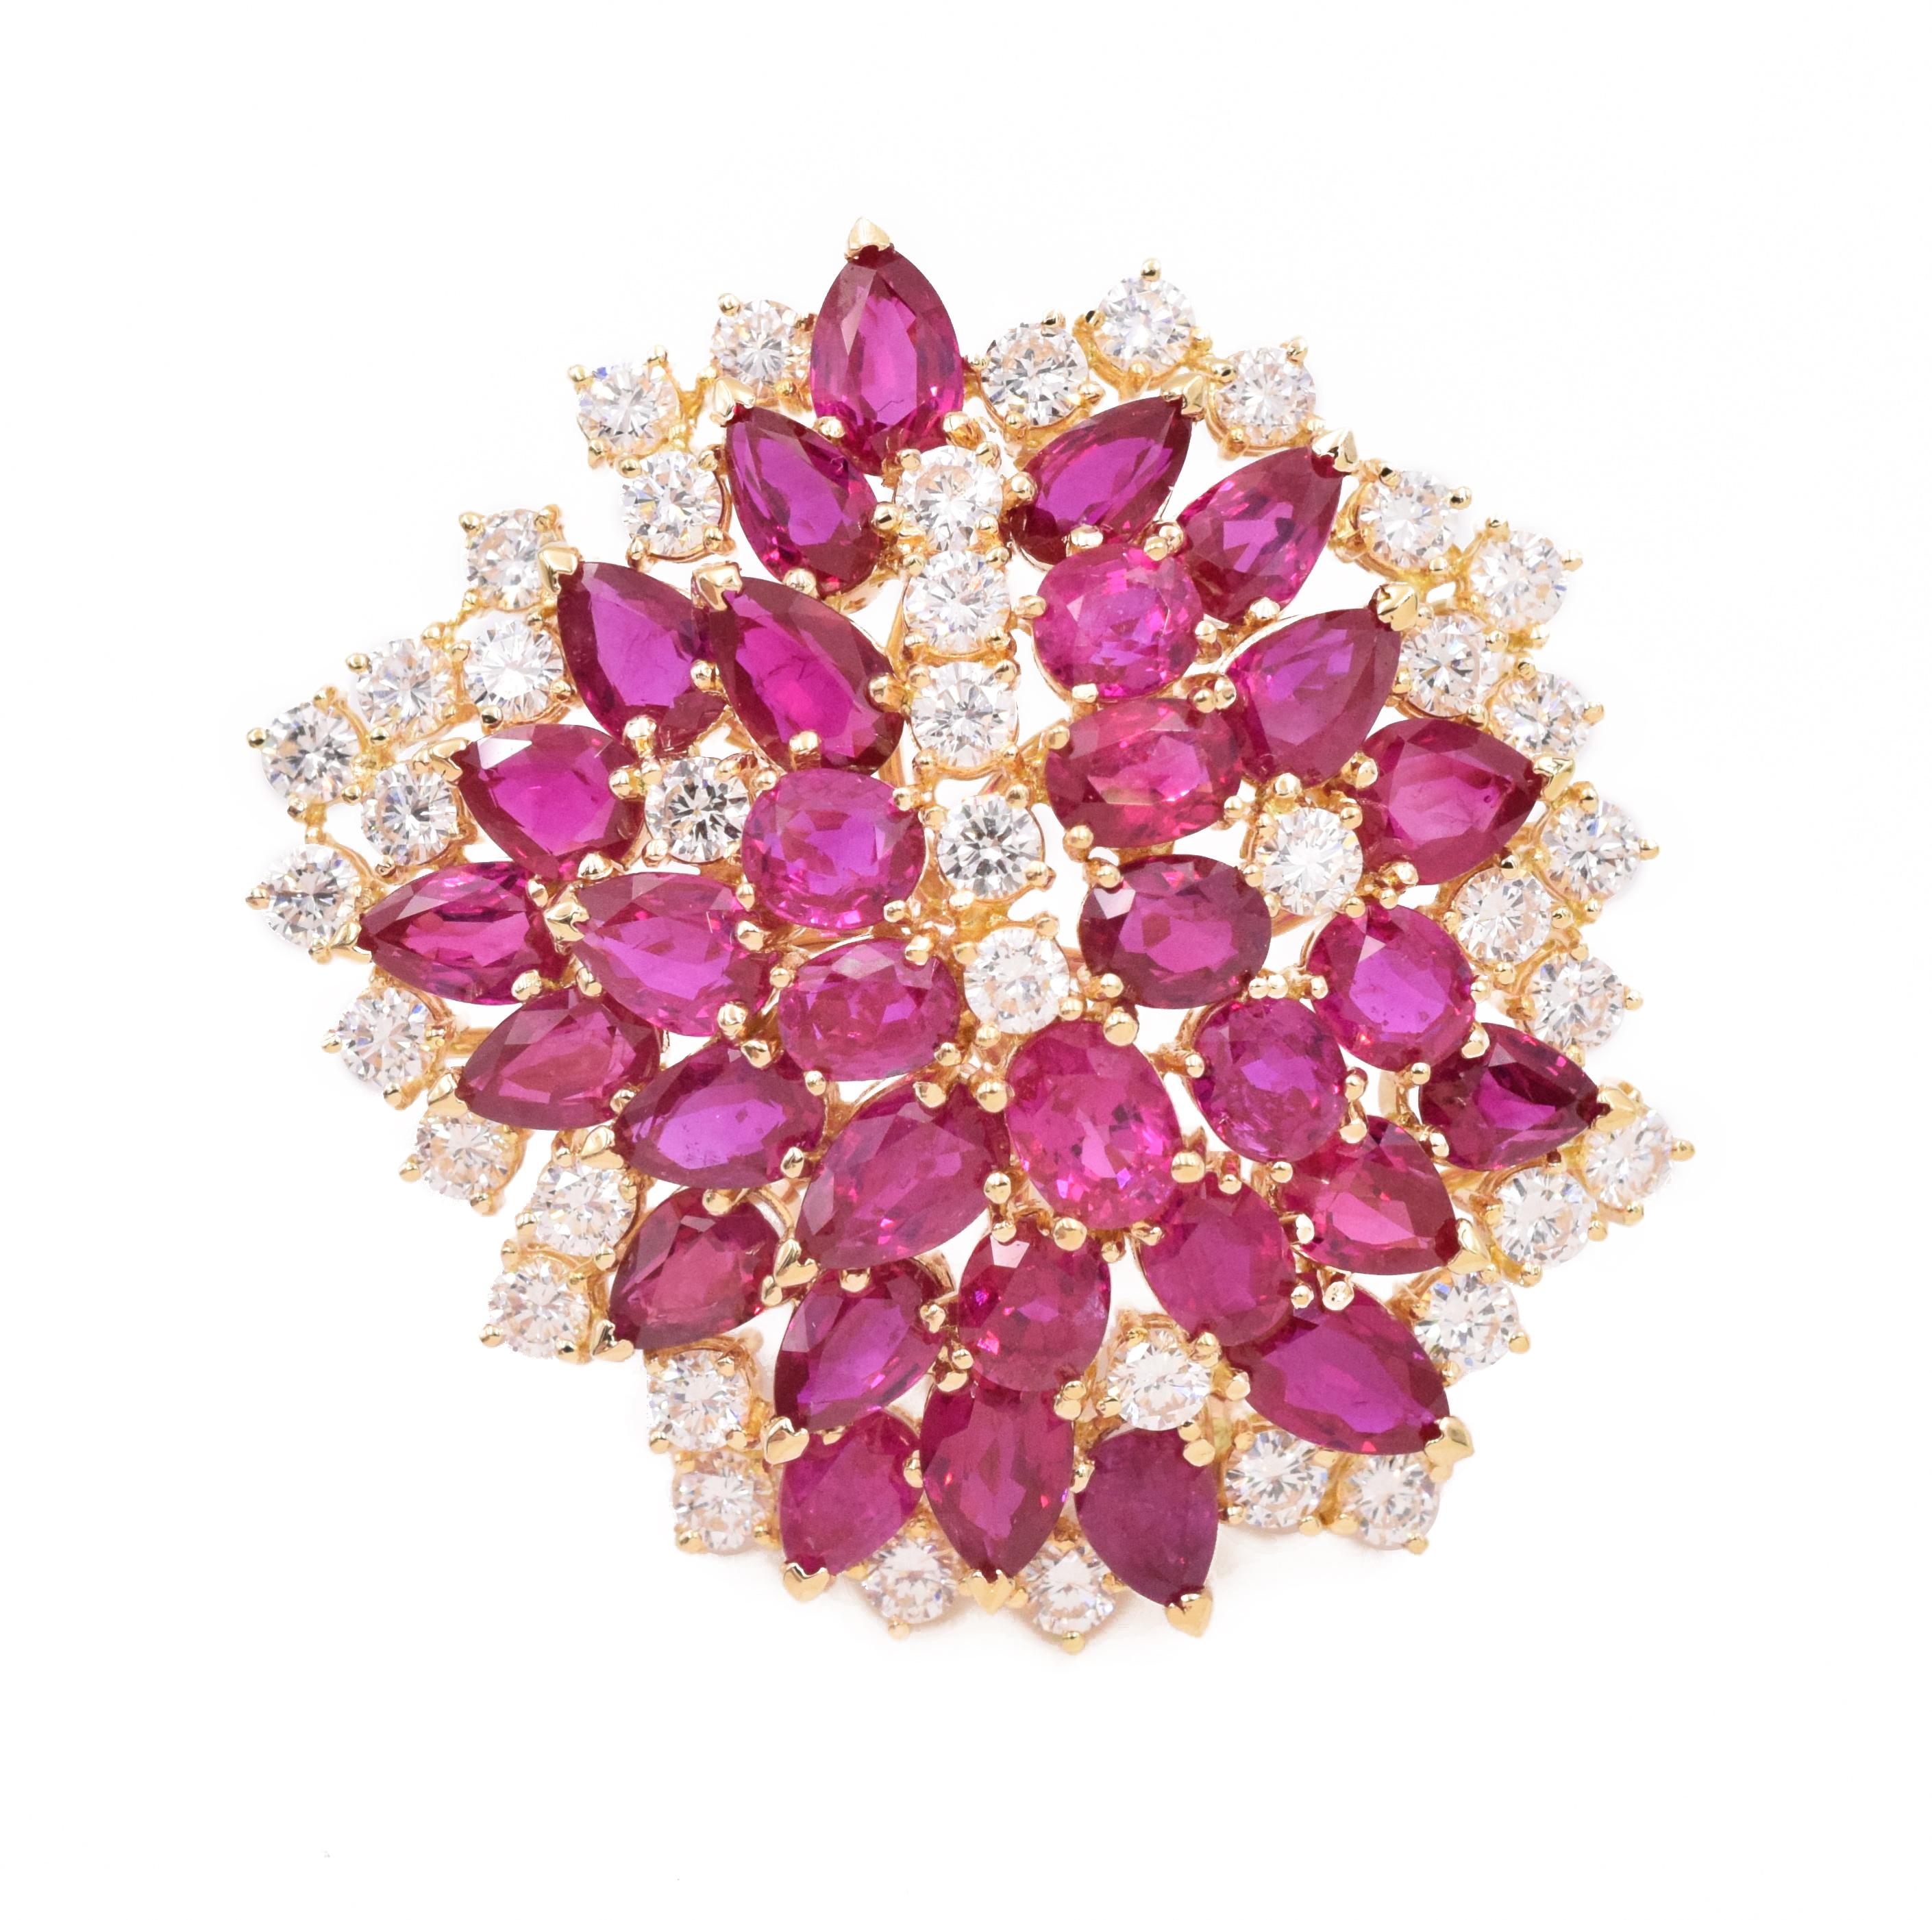 Pink sapphire & diamond leaf design brooch in 18k yellow gold. Set with 32 oval and pear shape pink sapphires  weighing total of approx. 15carats and 40 round brilliant cut diamonds weighing 6 carats
 The back of the brooch has a bail, can be used